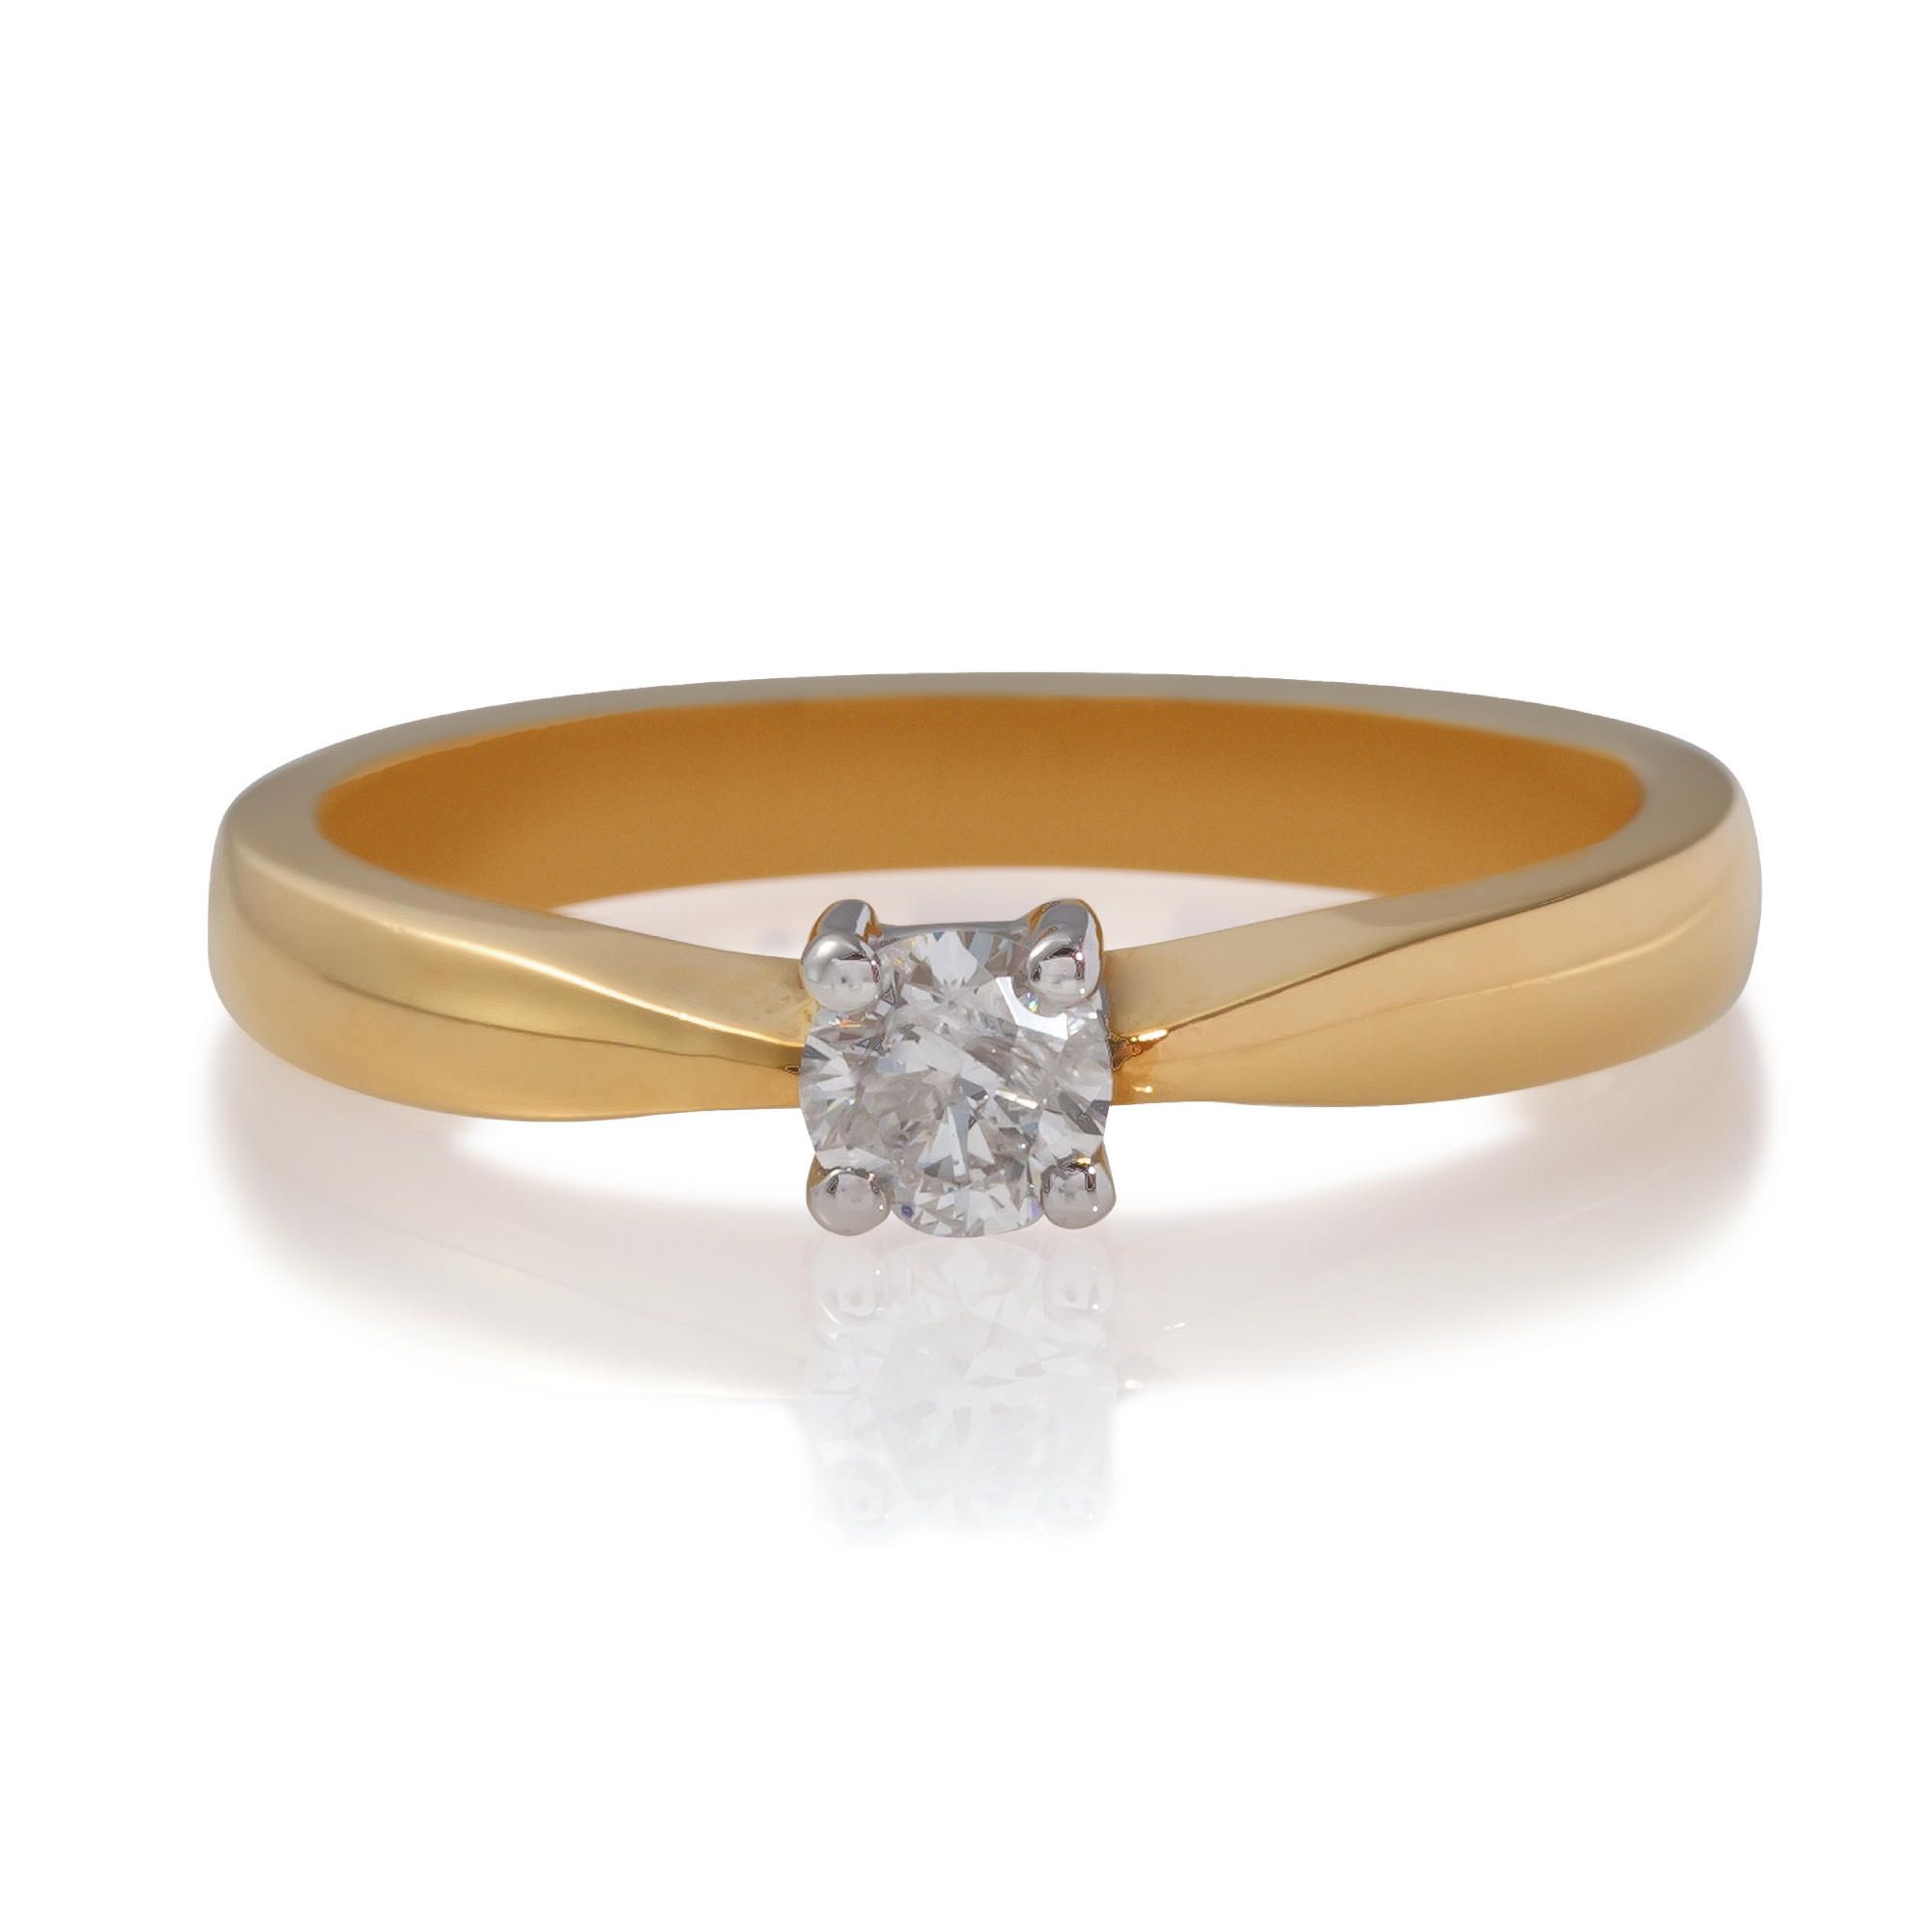 18ct Gold 1/4ct Diamond Solitaire Ring, N at Tesco Direct